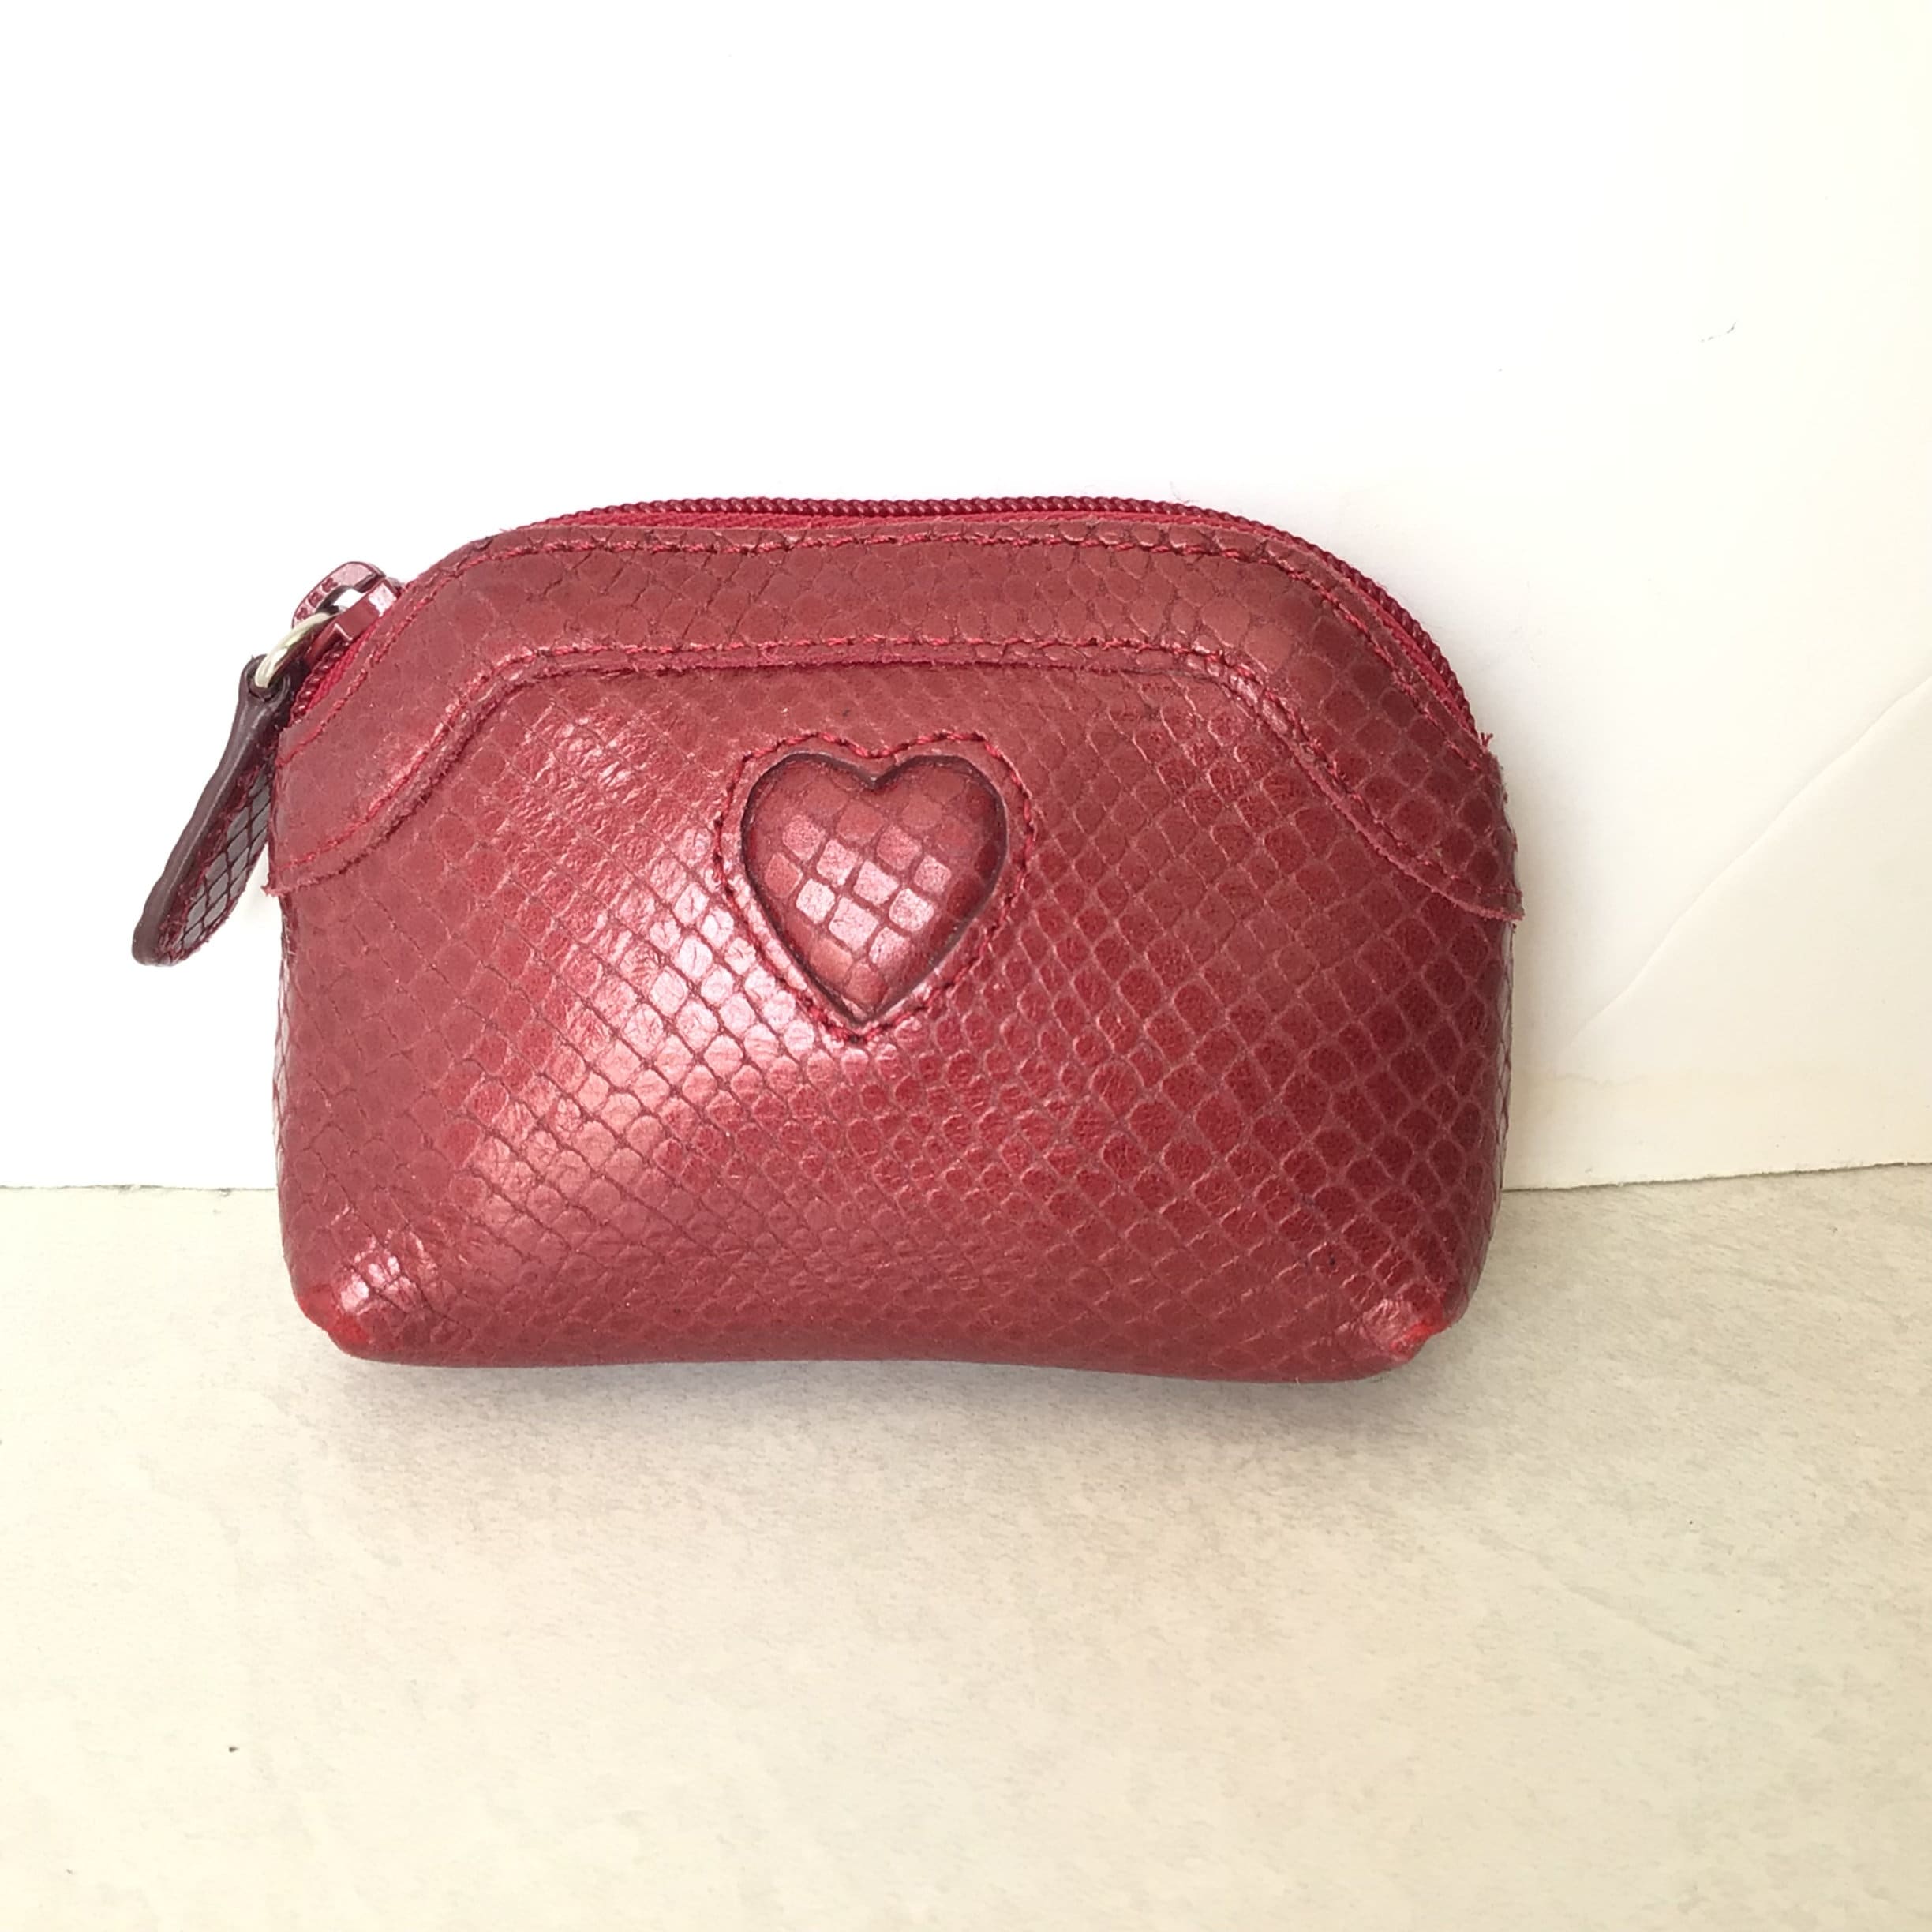 Brahmin Melbourne Heart Coin Purse in Red